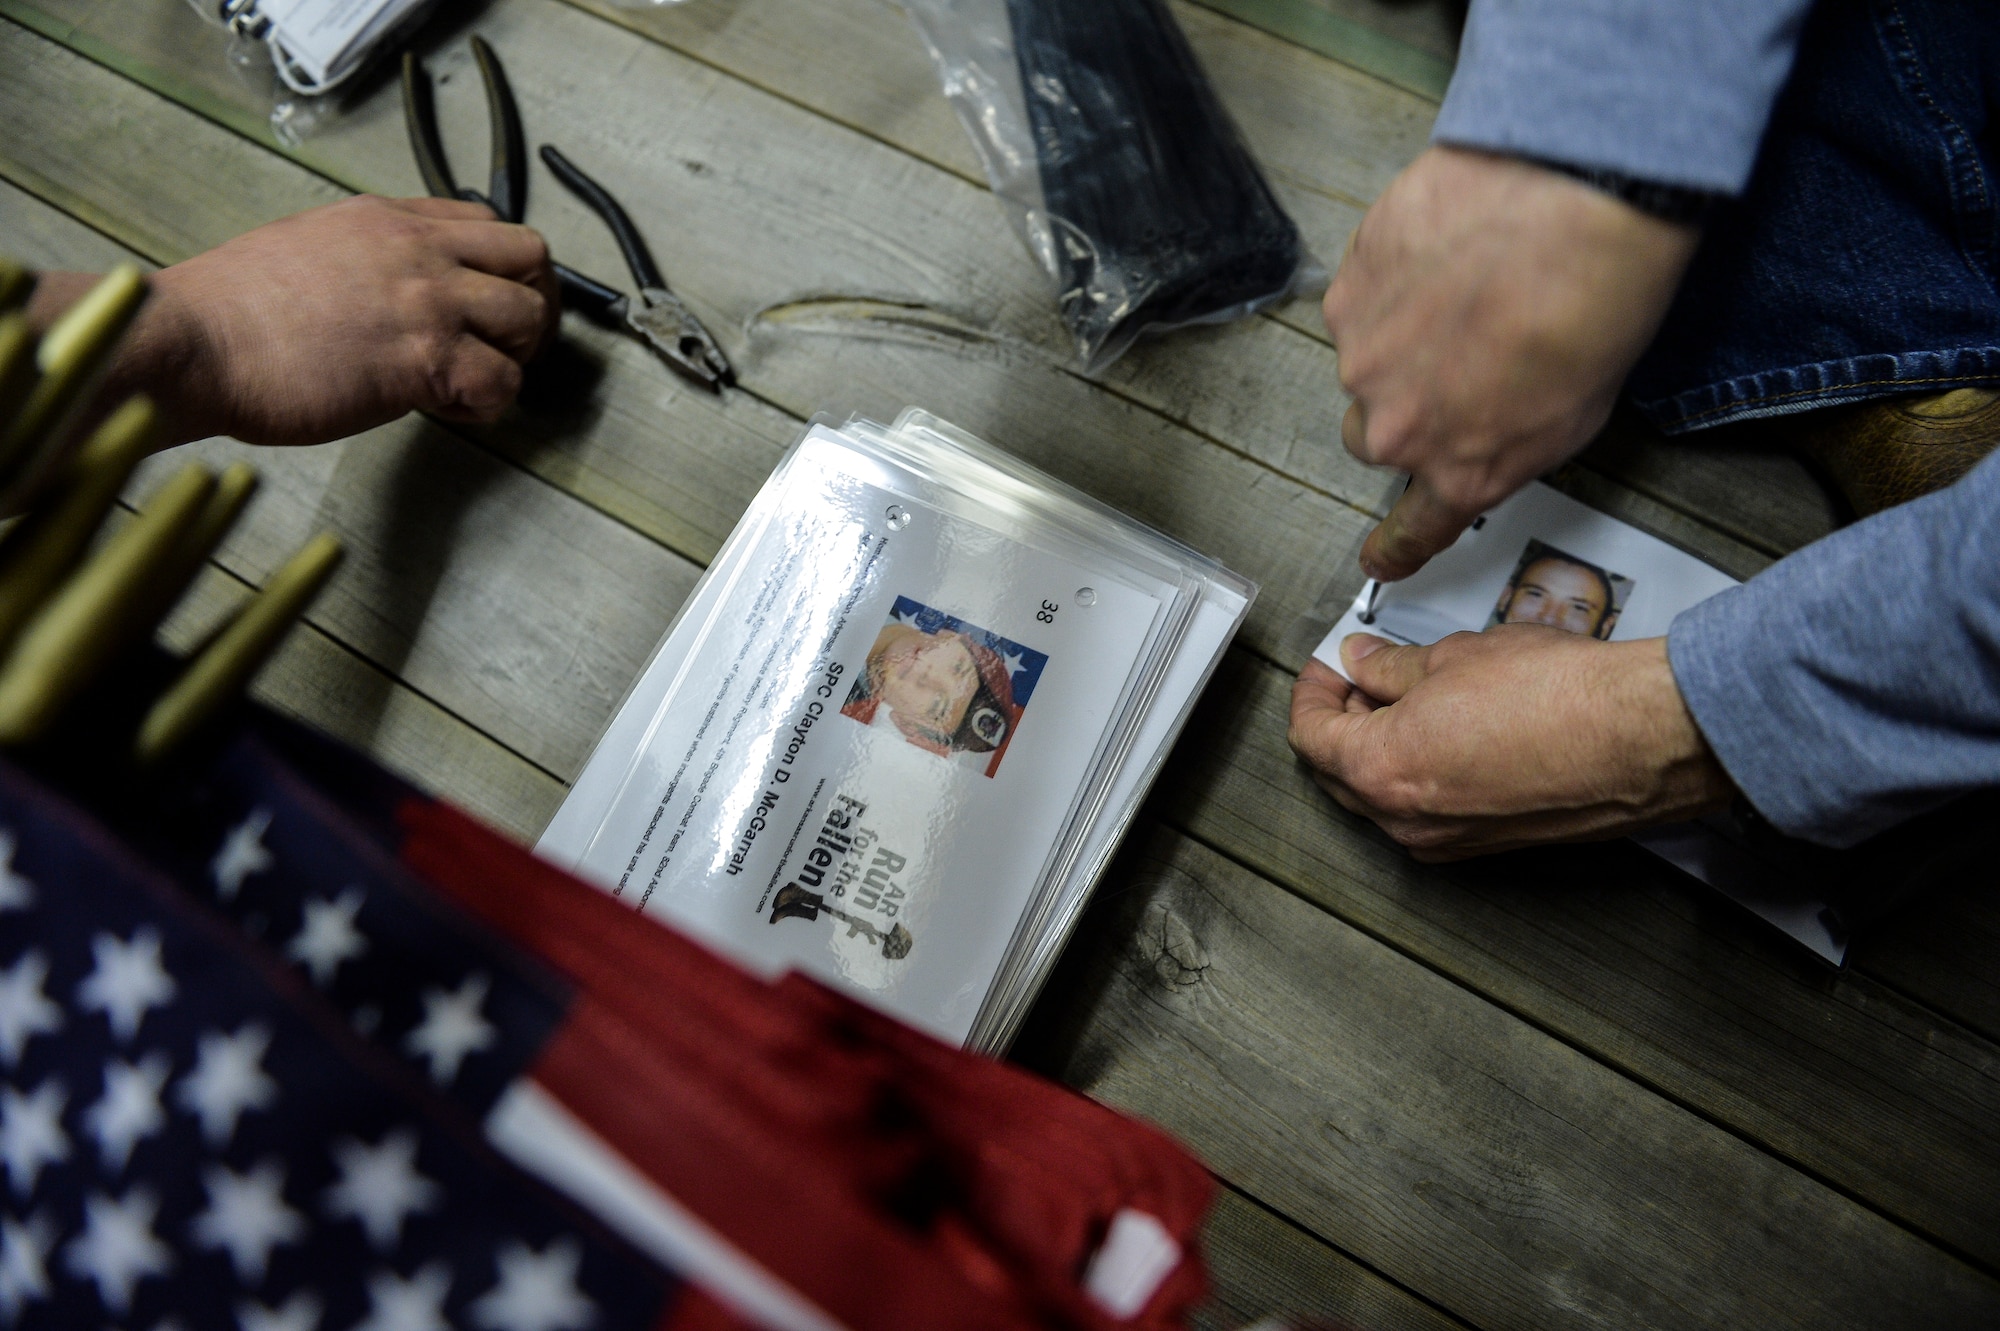 Volunteers tie the biographies of fallen Arkansan service members to American flags to be placed at every mile marker March 22, 2015, in Ozark, Ark. Participants placed 146 flags along Arkansas Highway 64, from Ozark, to Little Rock, Ark. (U.S. Air Force photo/Senior Airman Cliffton Dolezal)) 